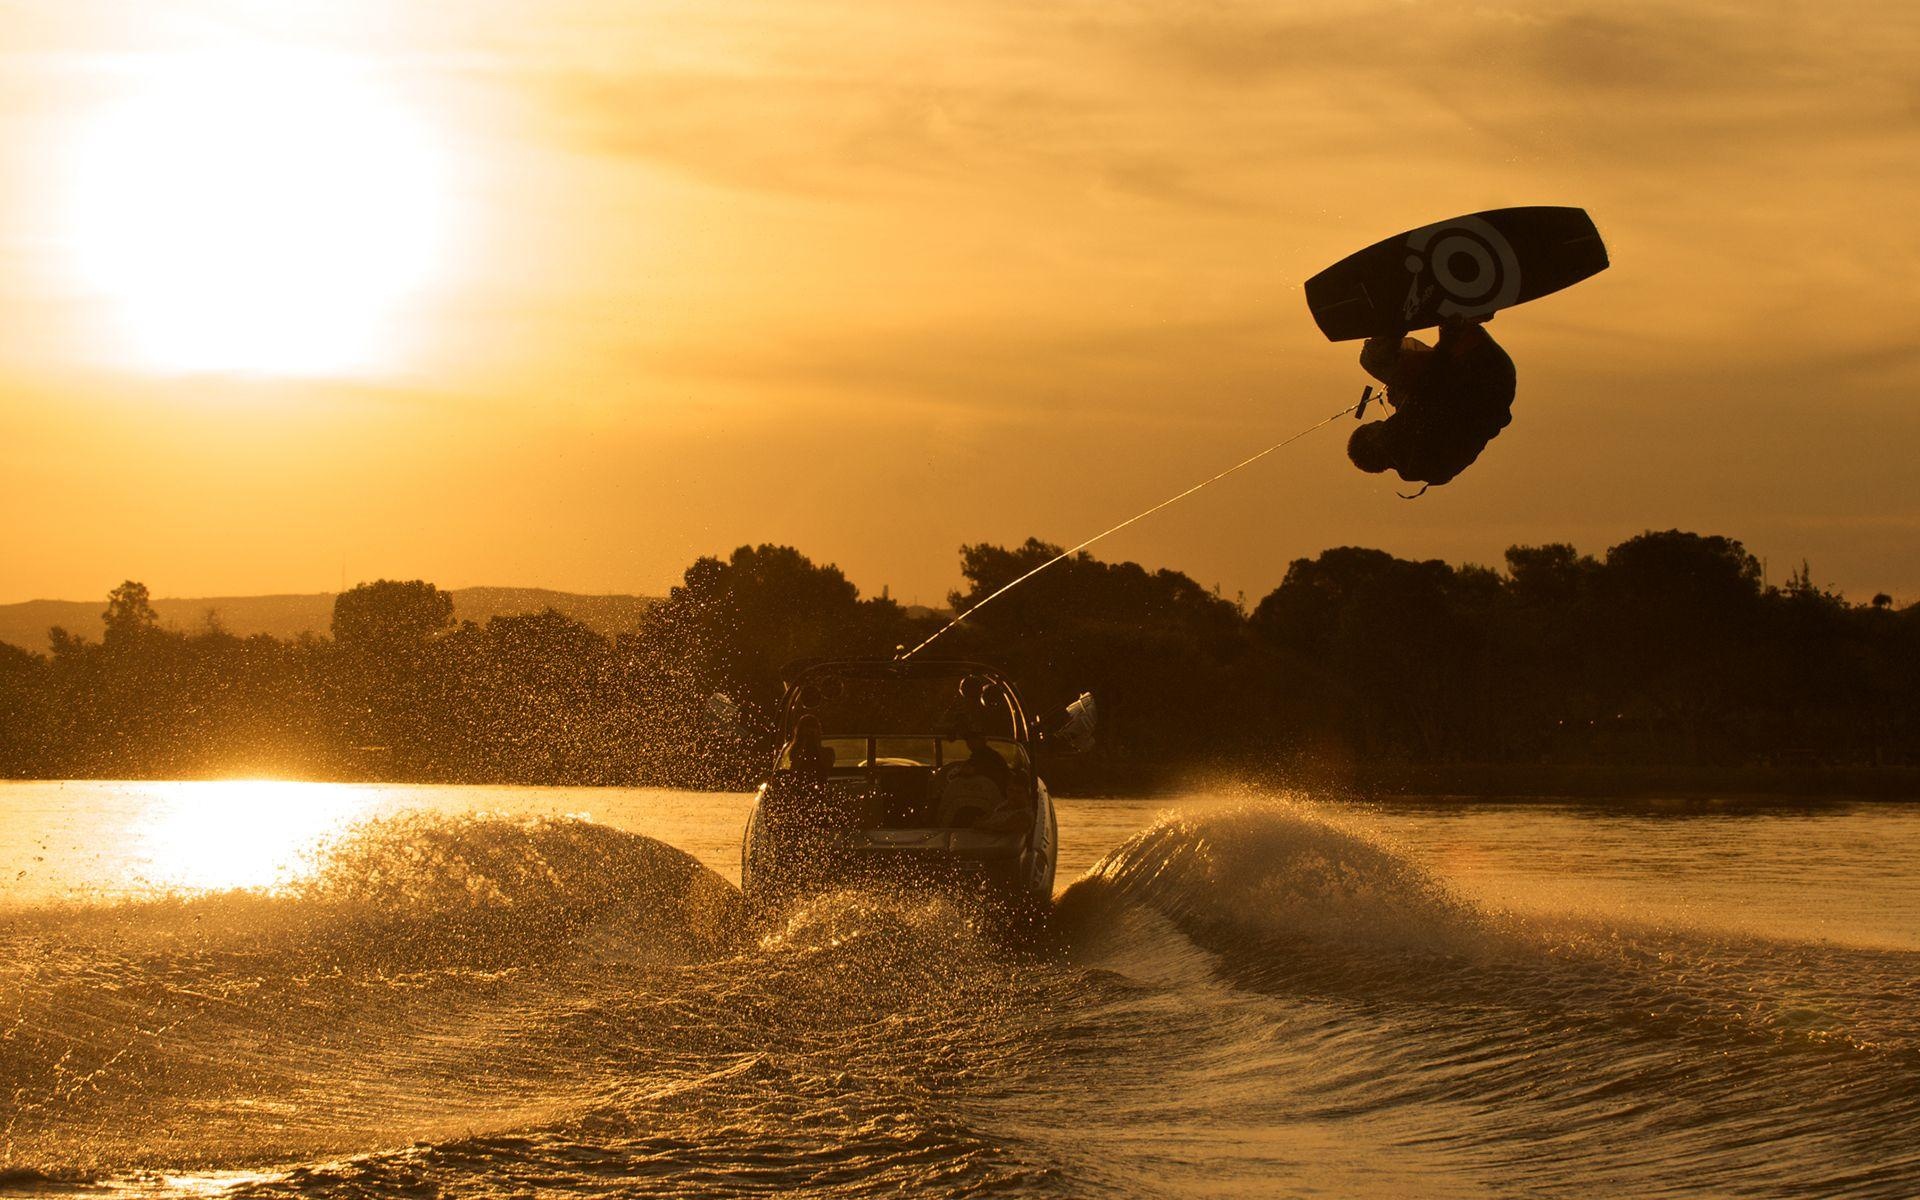 Wakeboarding: Extreme 360 side flip by a pro surfer, Water sports in the sunset. 1920x1200 HD Background.